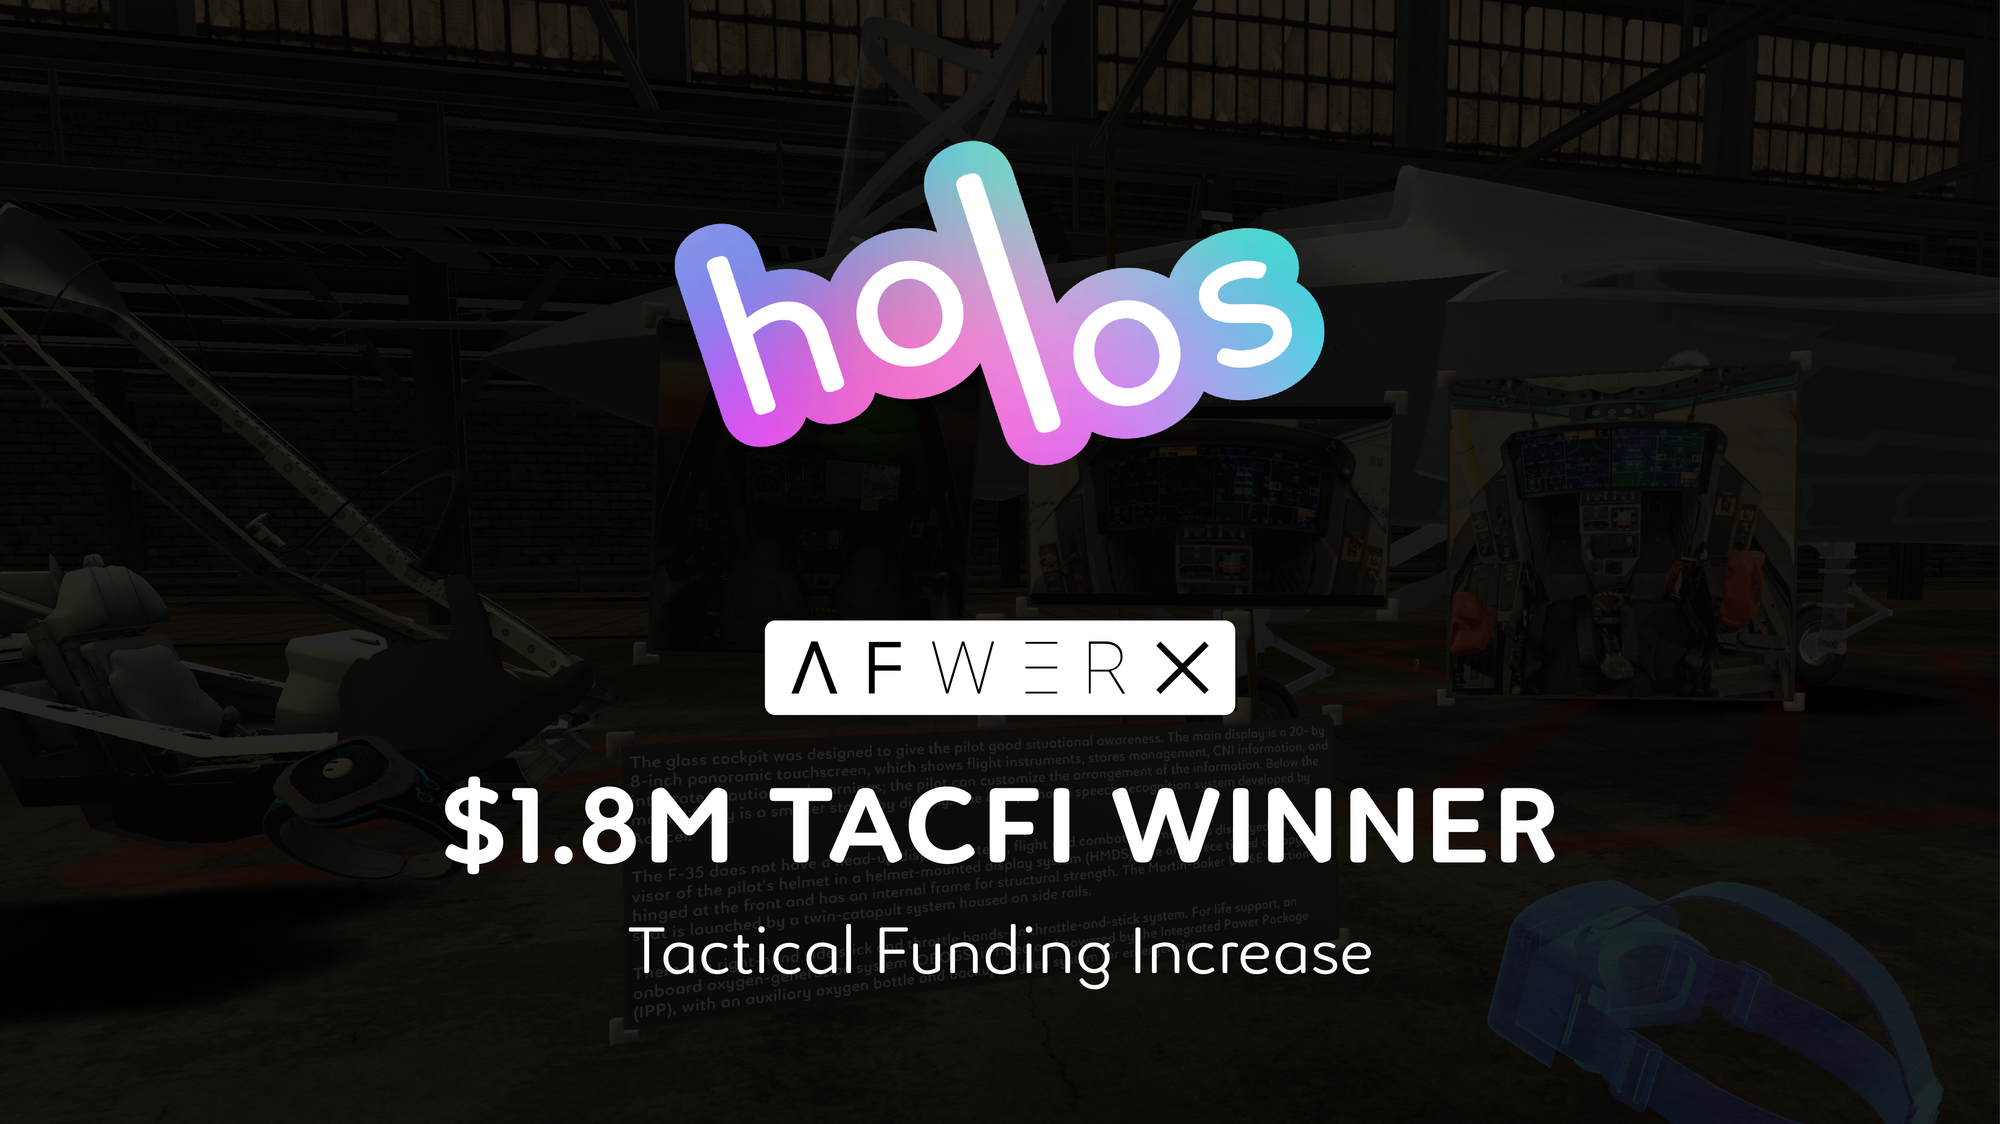 AFVentures Selects Holos for $1.8M TACFI Contract, Matching $1.8M in VC Funds to Scale Platform Across the U.S. Air Force